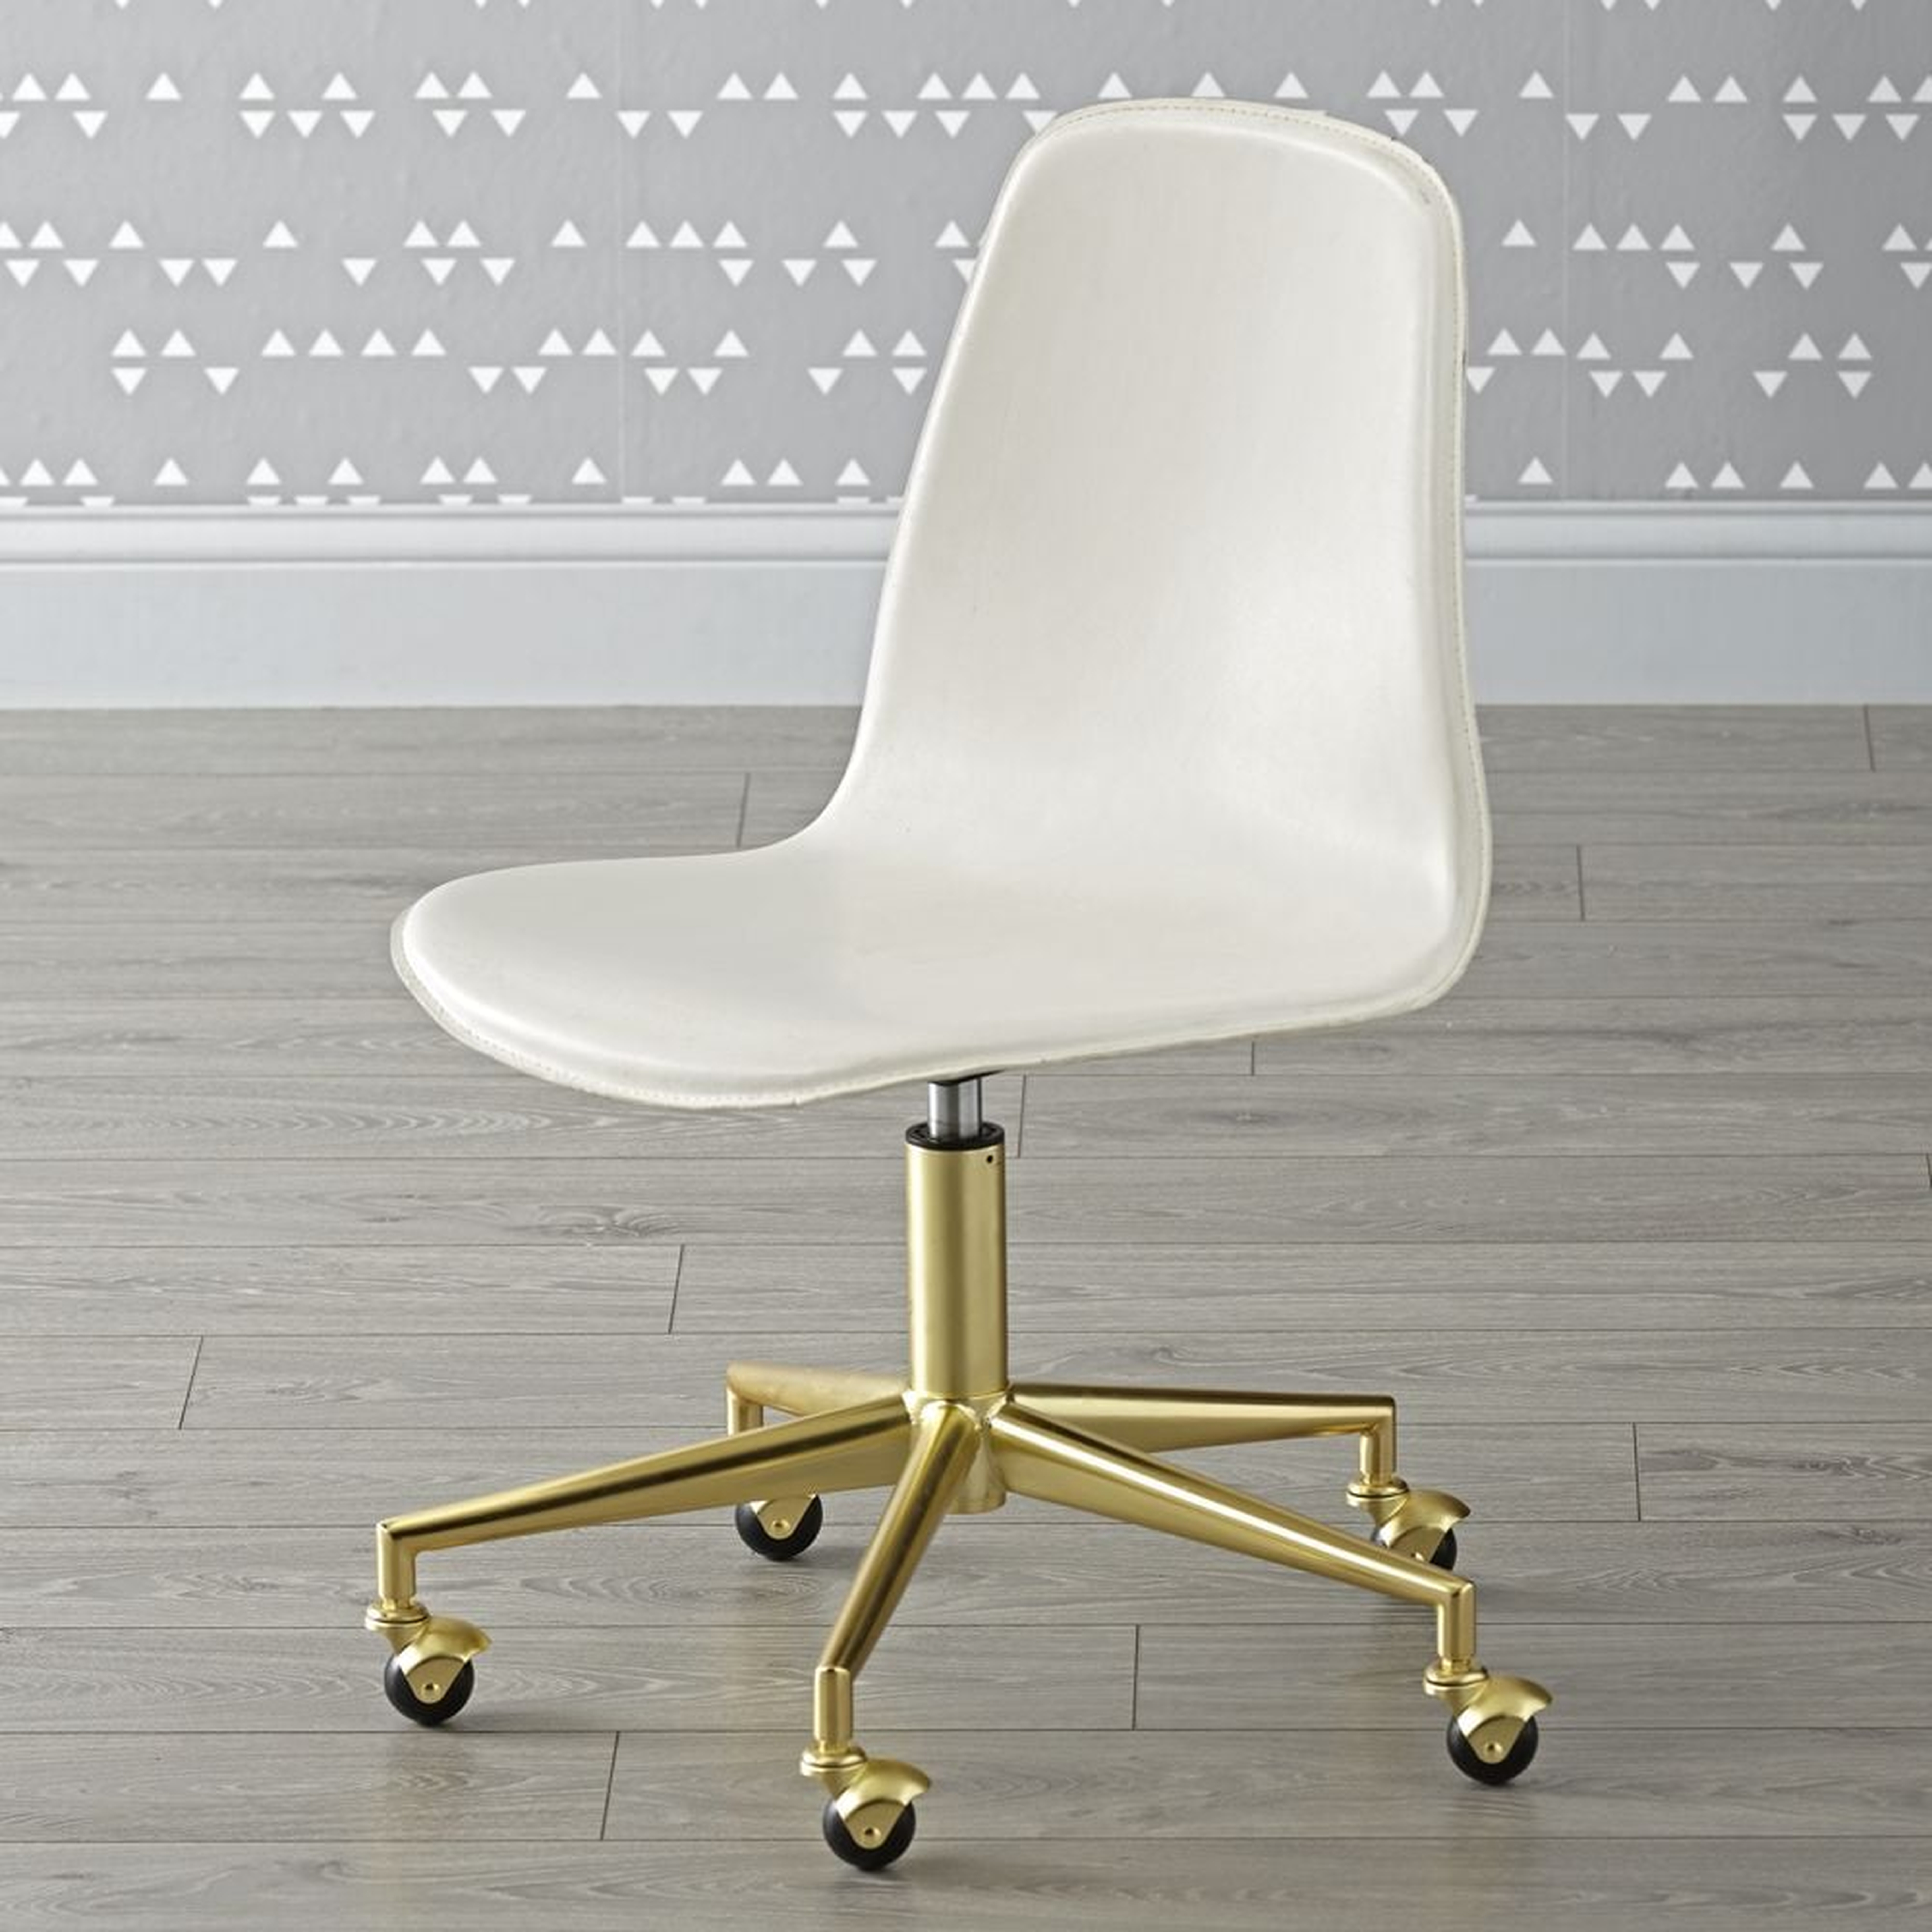 Kids Class Act White and Gold Desk Chair - Crate and Barrel